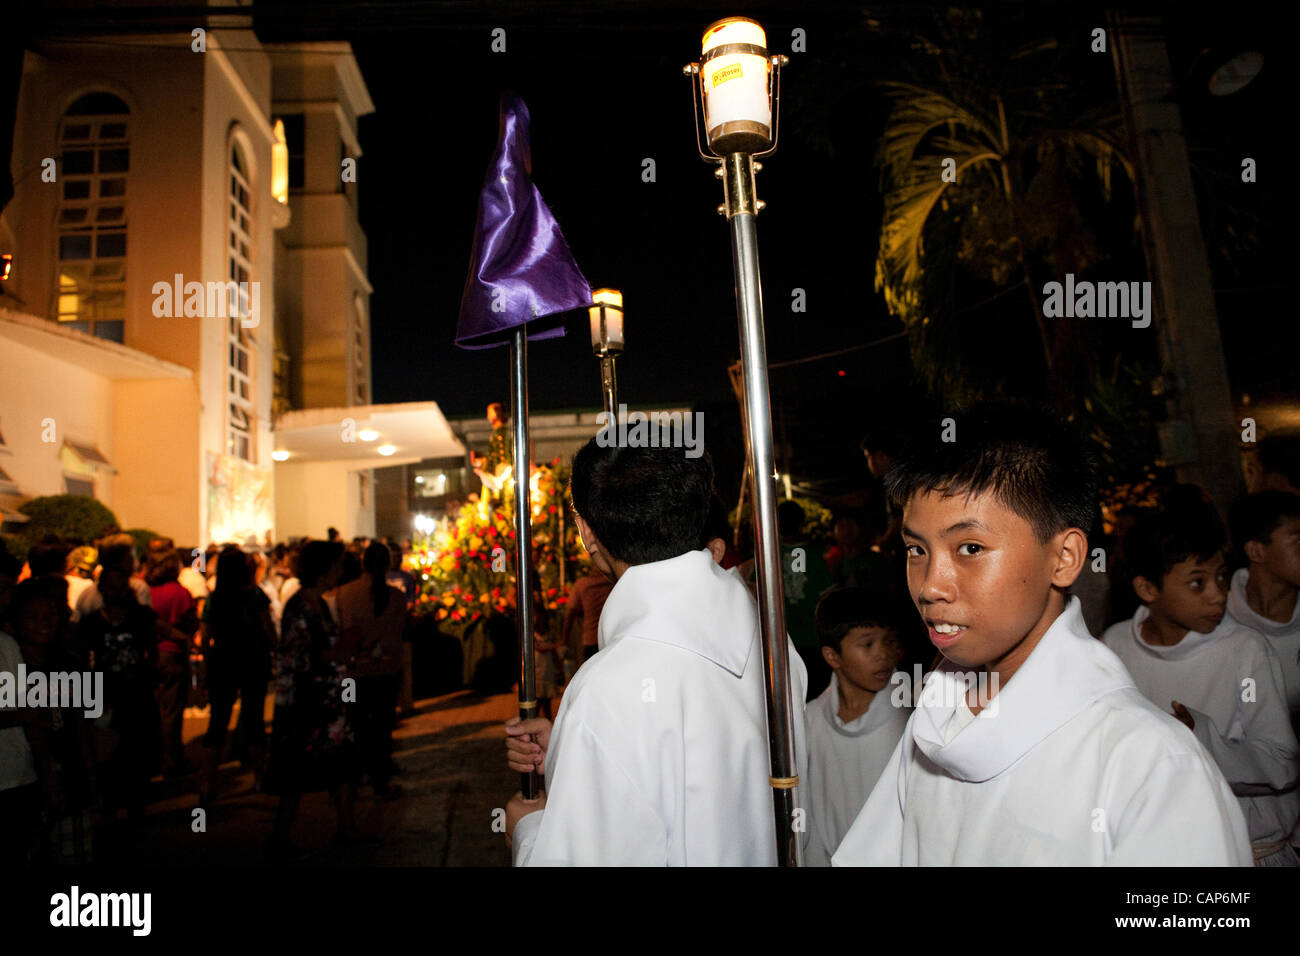 Cebu City, Philippines, 4.April 2012: Traditional Easter ceremonial parade with the Saints.  Preparations for the parade, the sacristans are leading the parade. Stock Photo